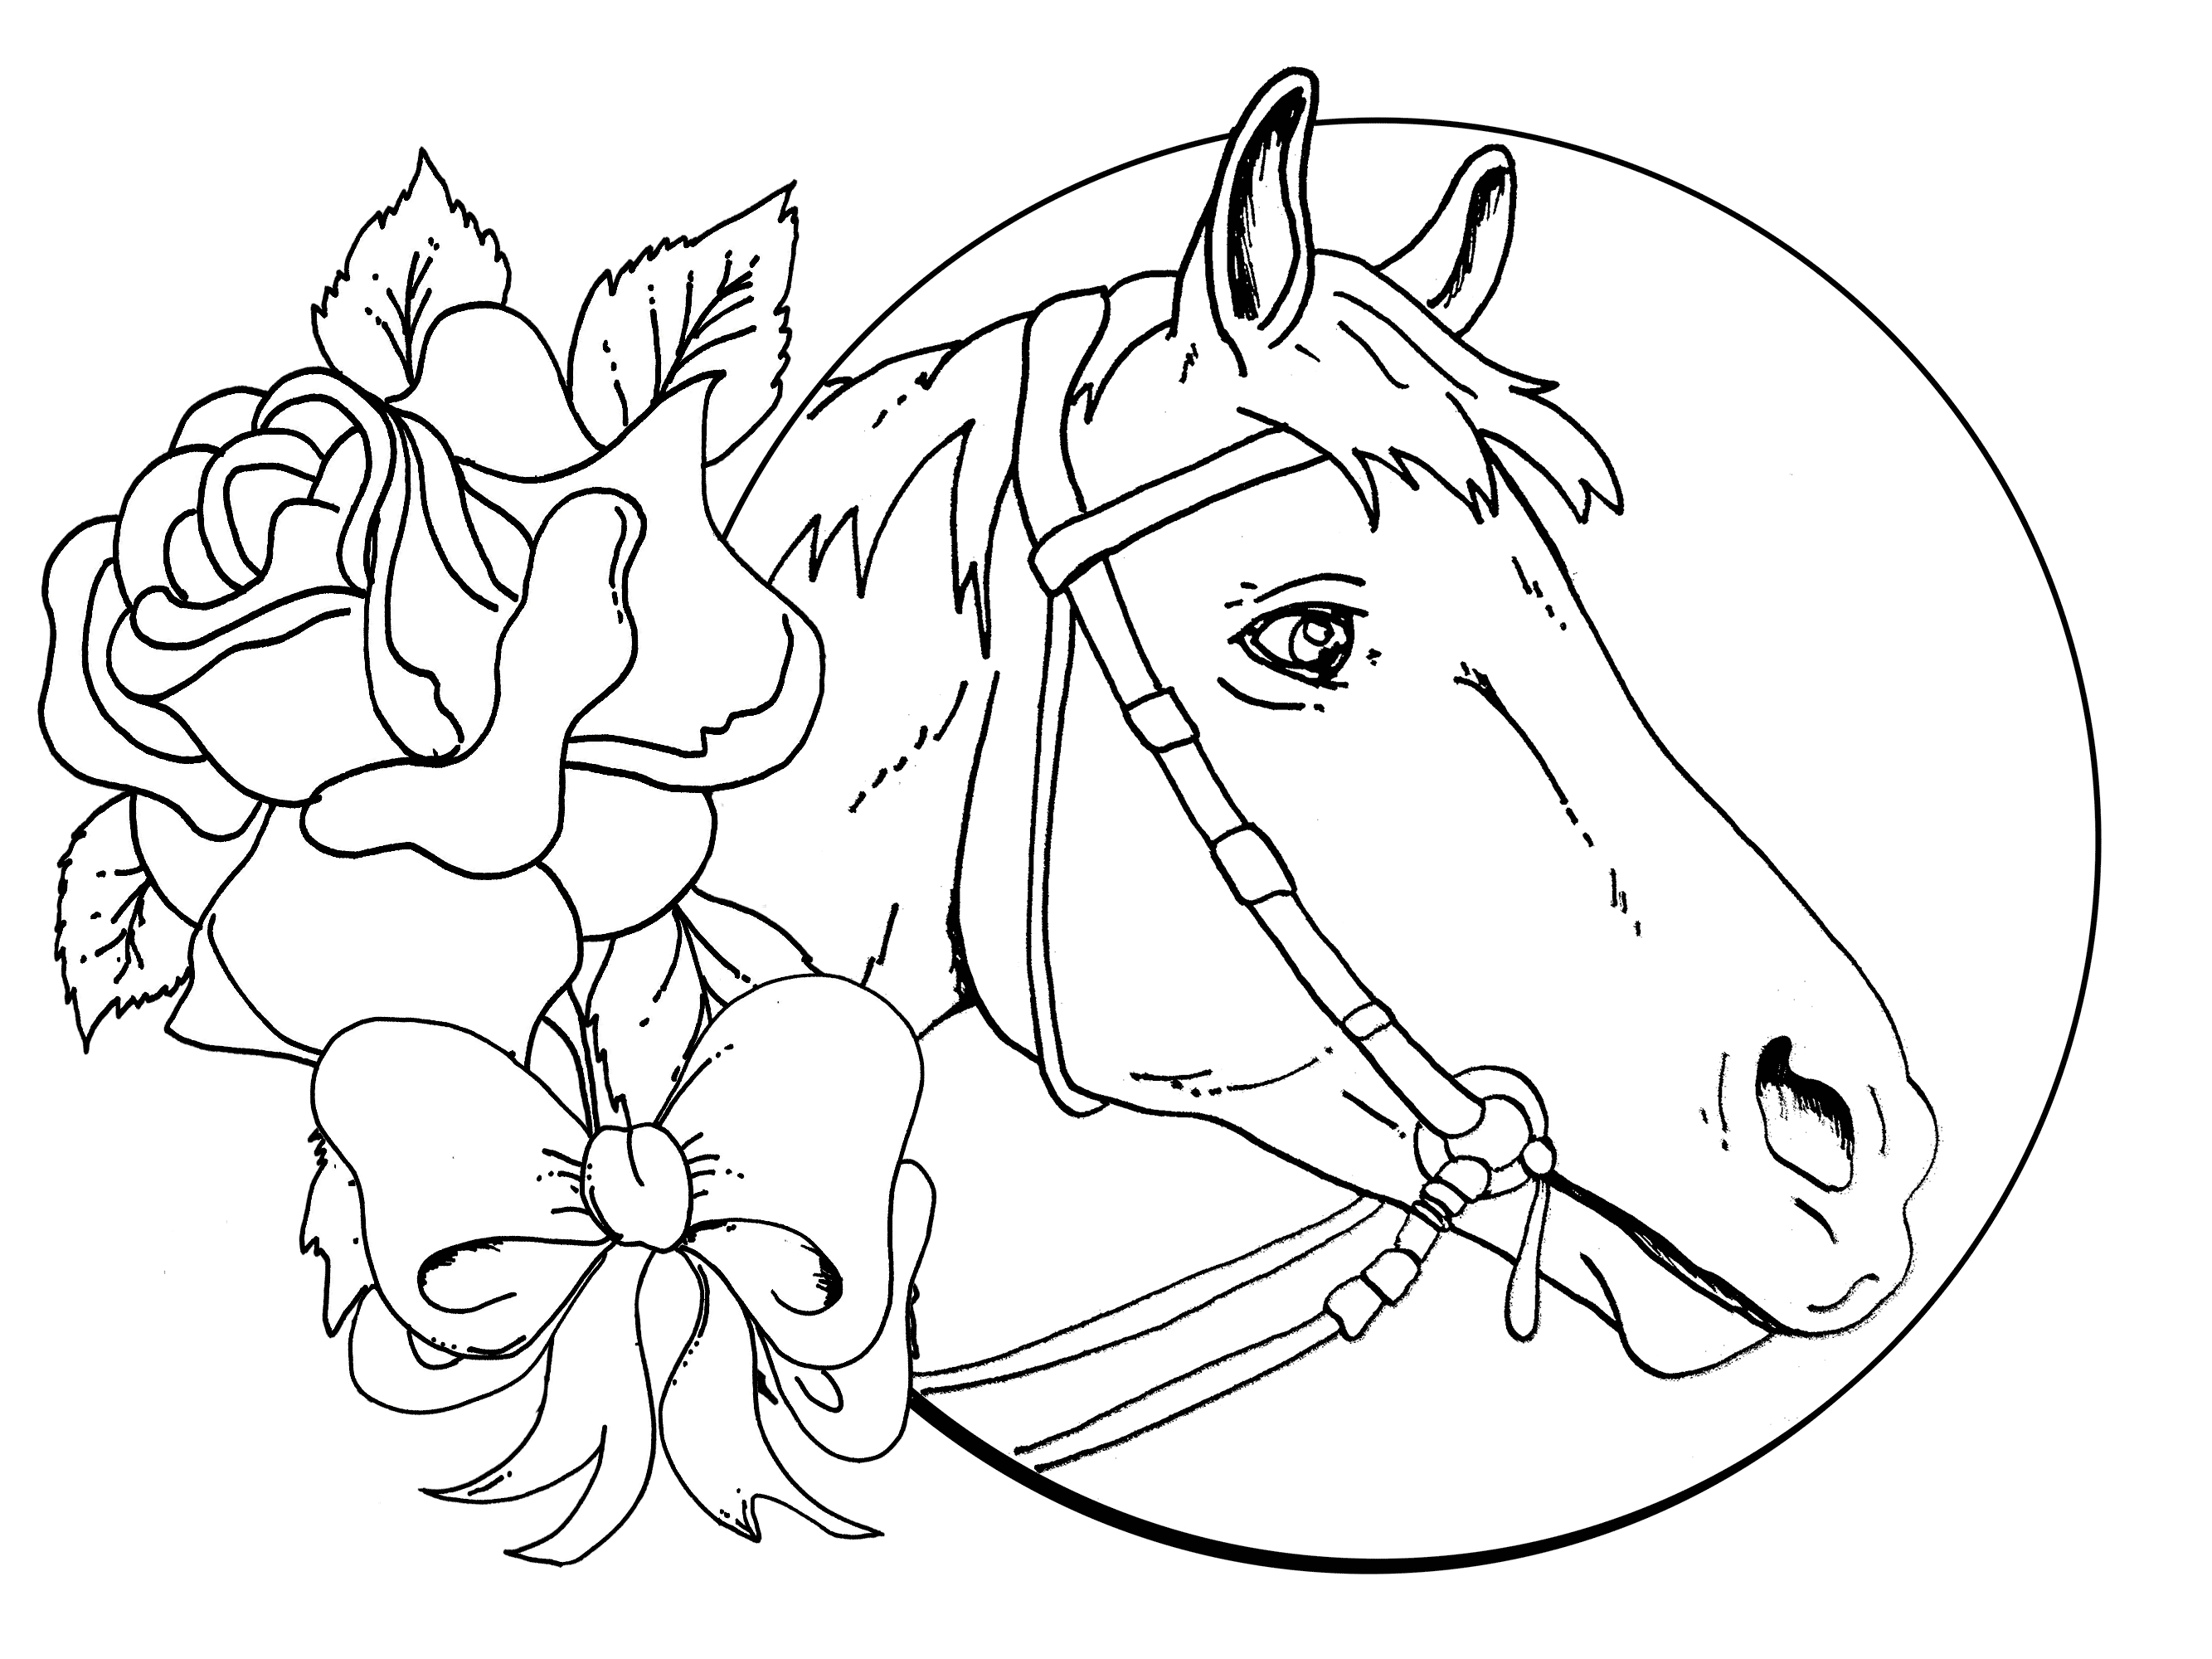 Teenage Coloring Pages Wonderful online for free - Coloring pages